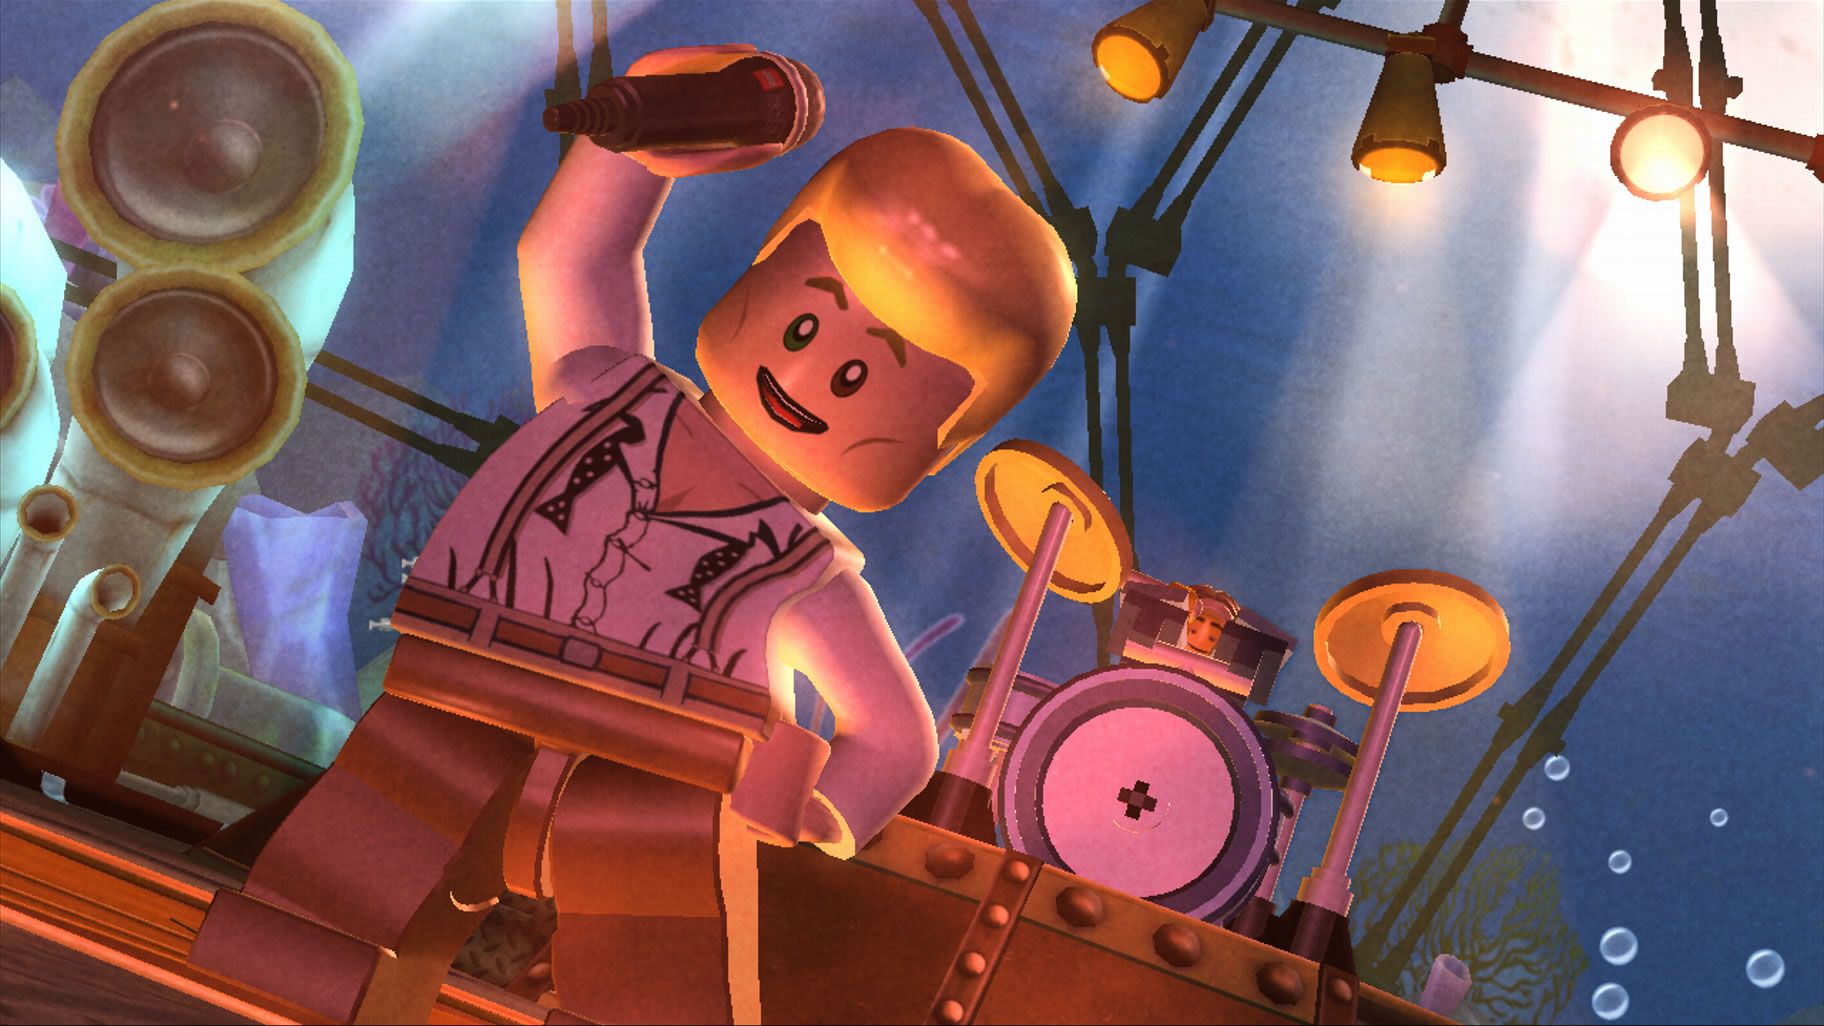 Lego Rock Band - Bowie (4)